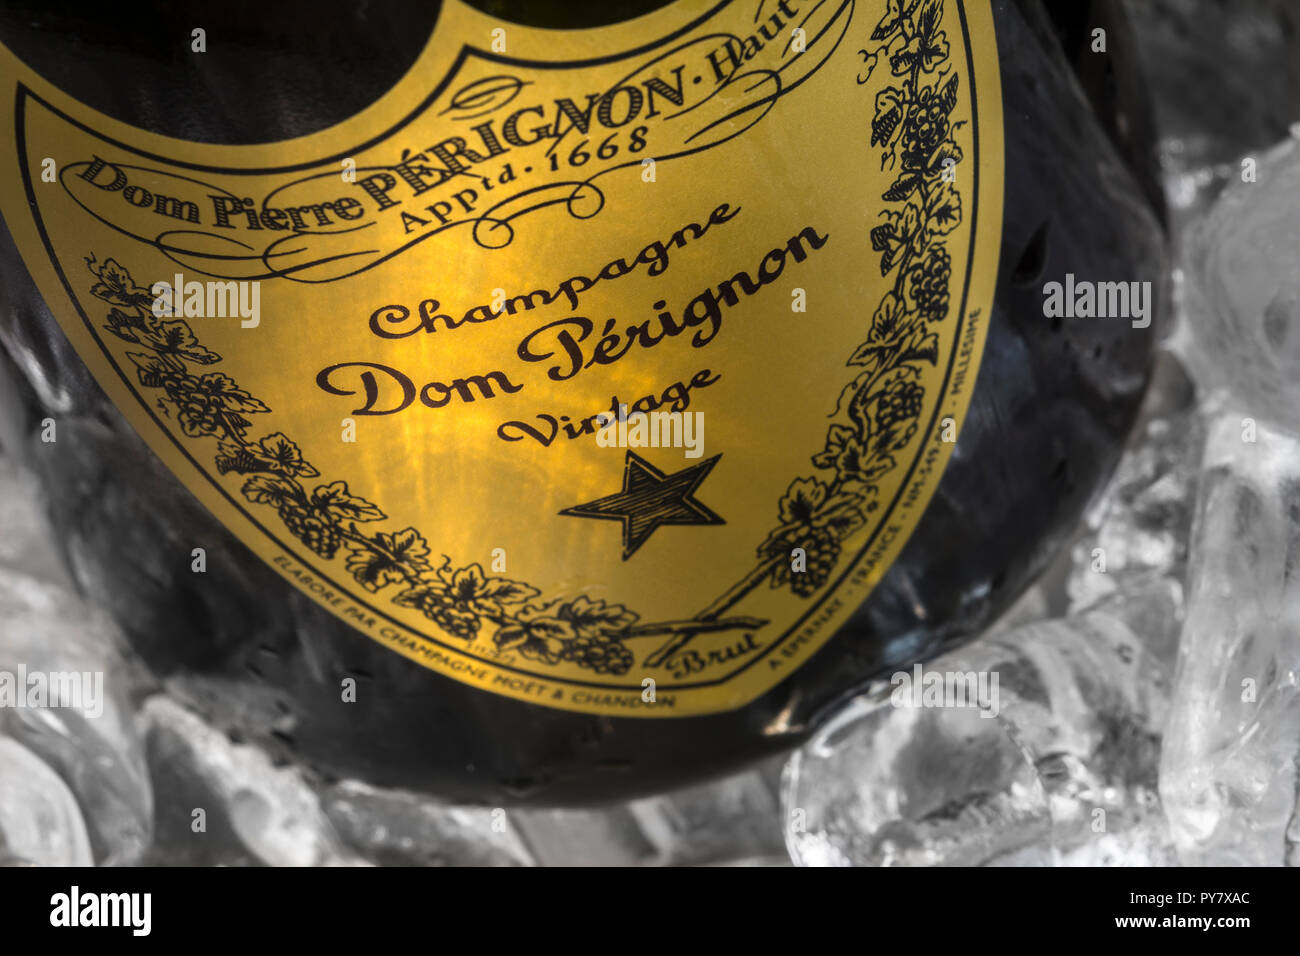 Dom Perignon label close up in champagne ice bucket with ice reflecting shafts of light on vintage Perignon champagne label in fine dining situation Stock Photo